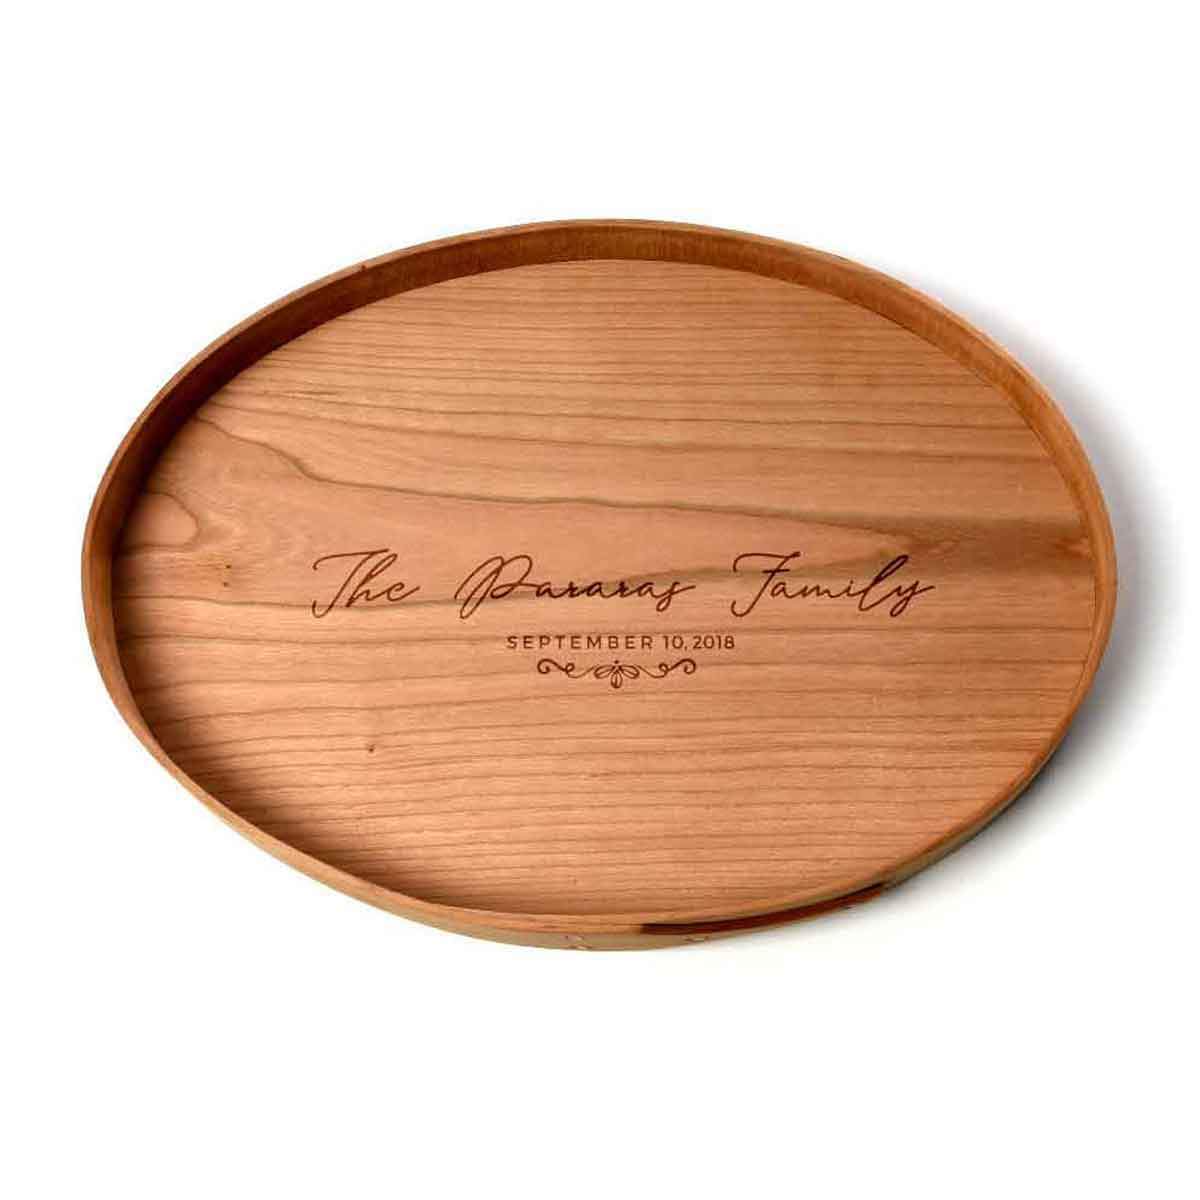 WOOD TRAY - Name and date